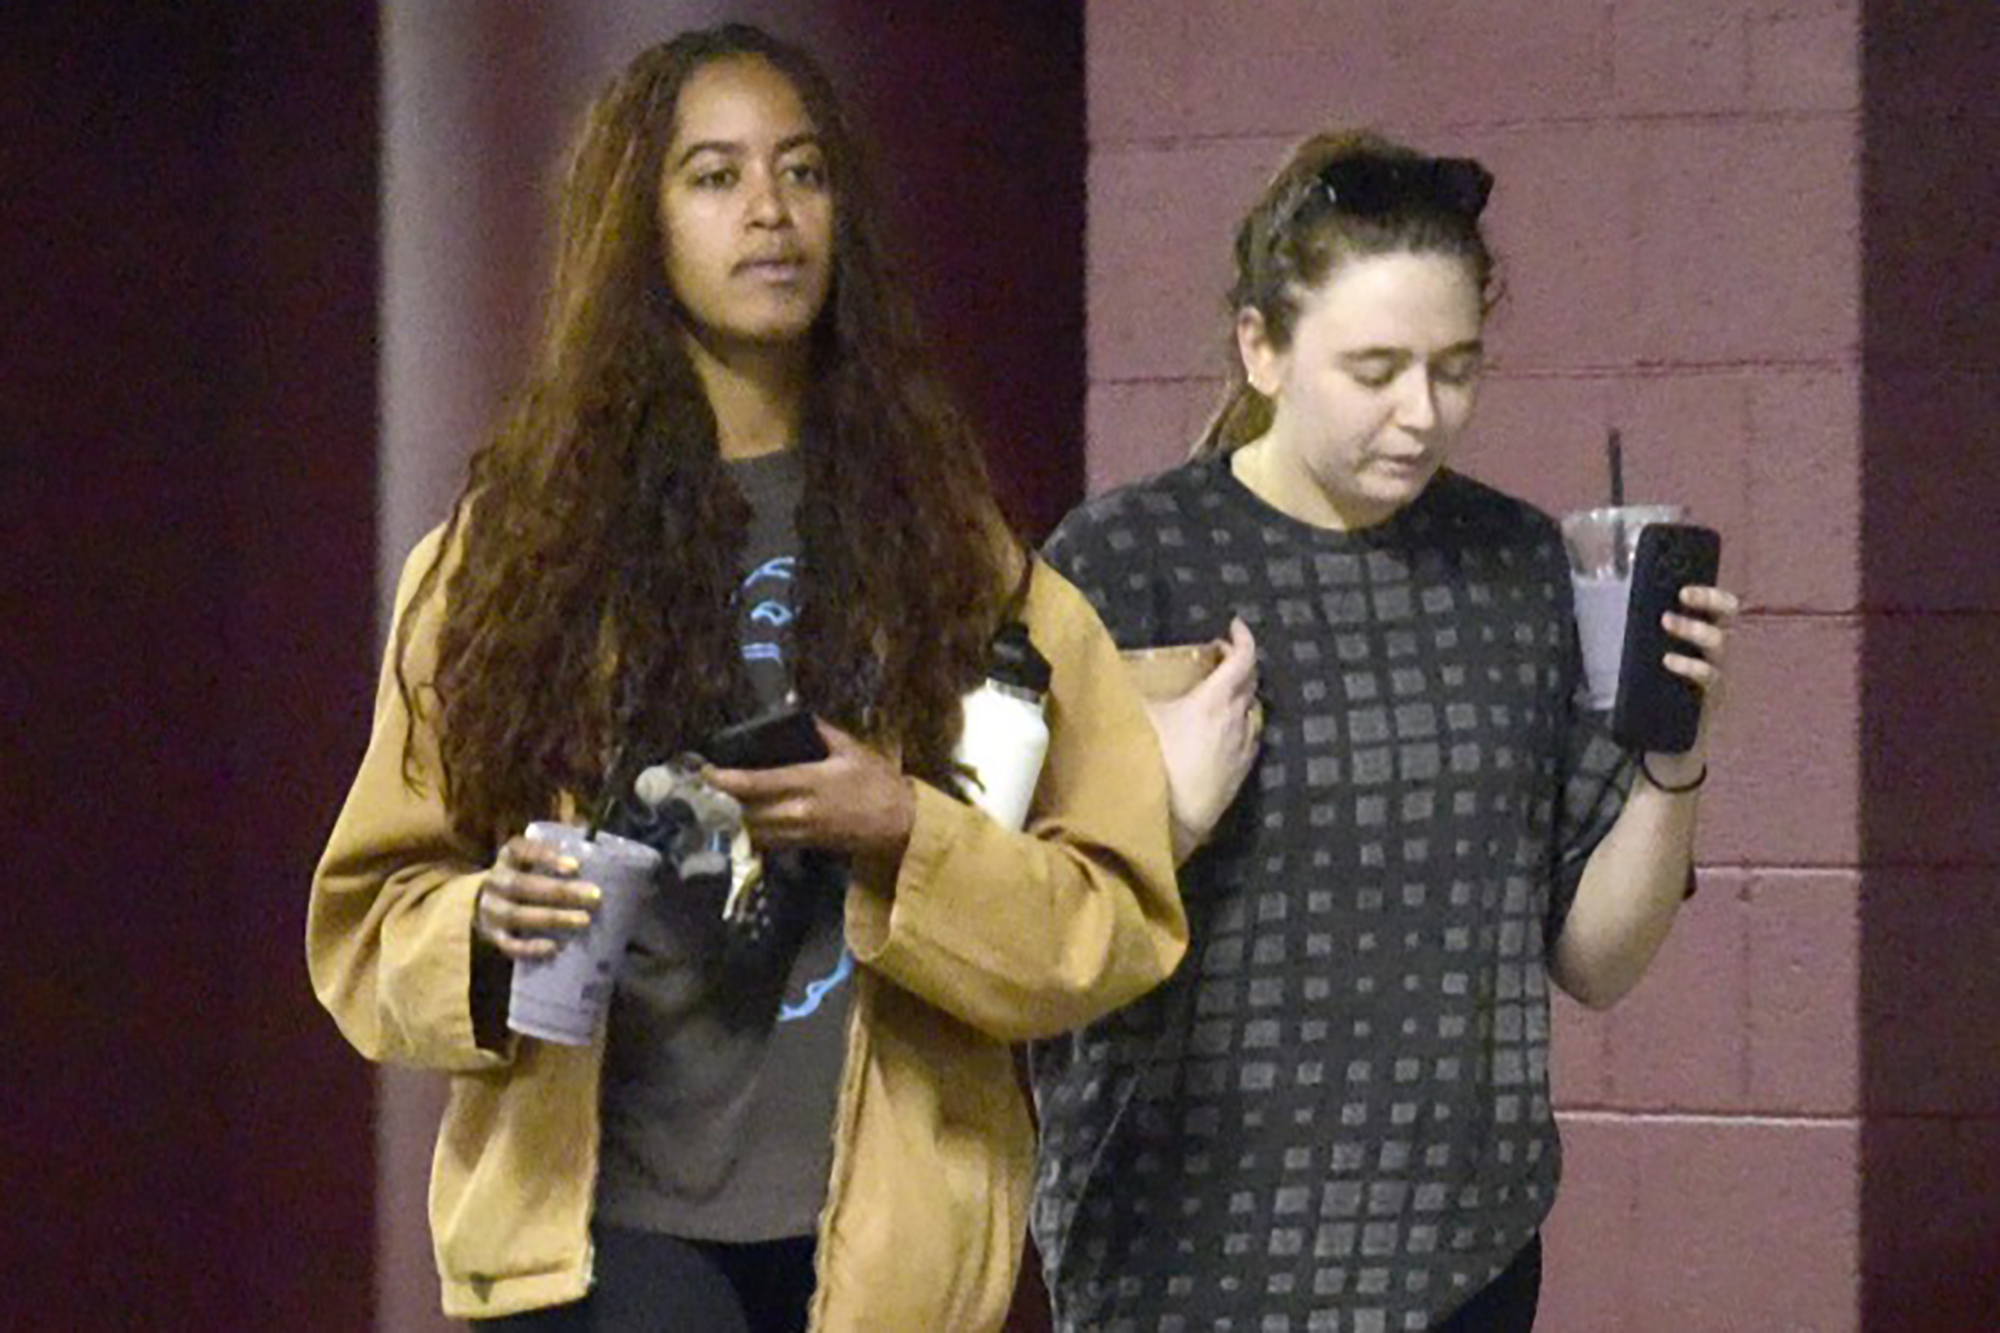 Malia Obama departs a exercise class with a buddy and extra star snaps